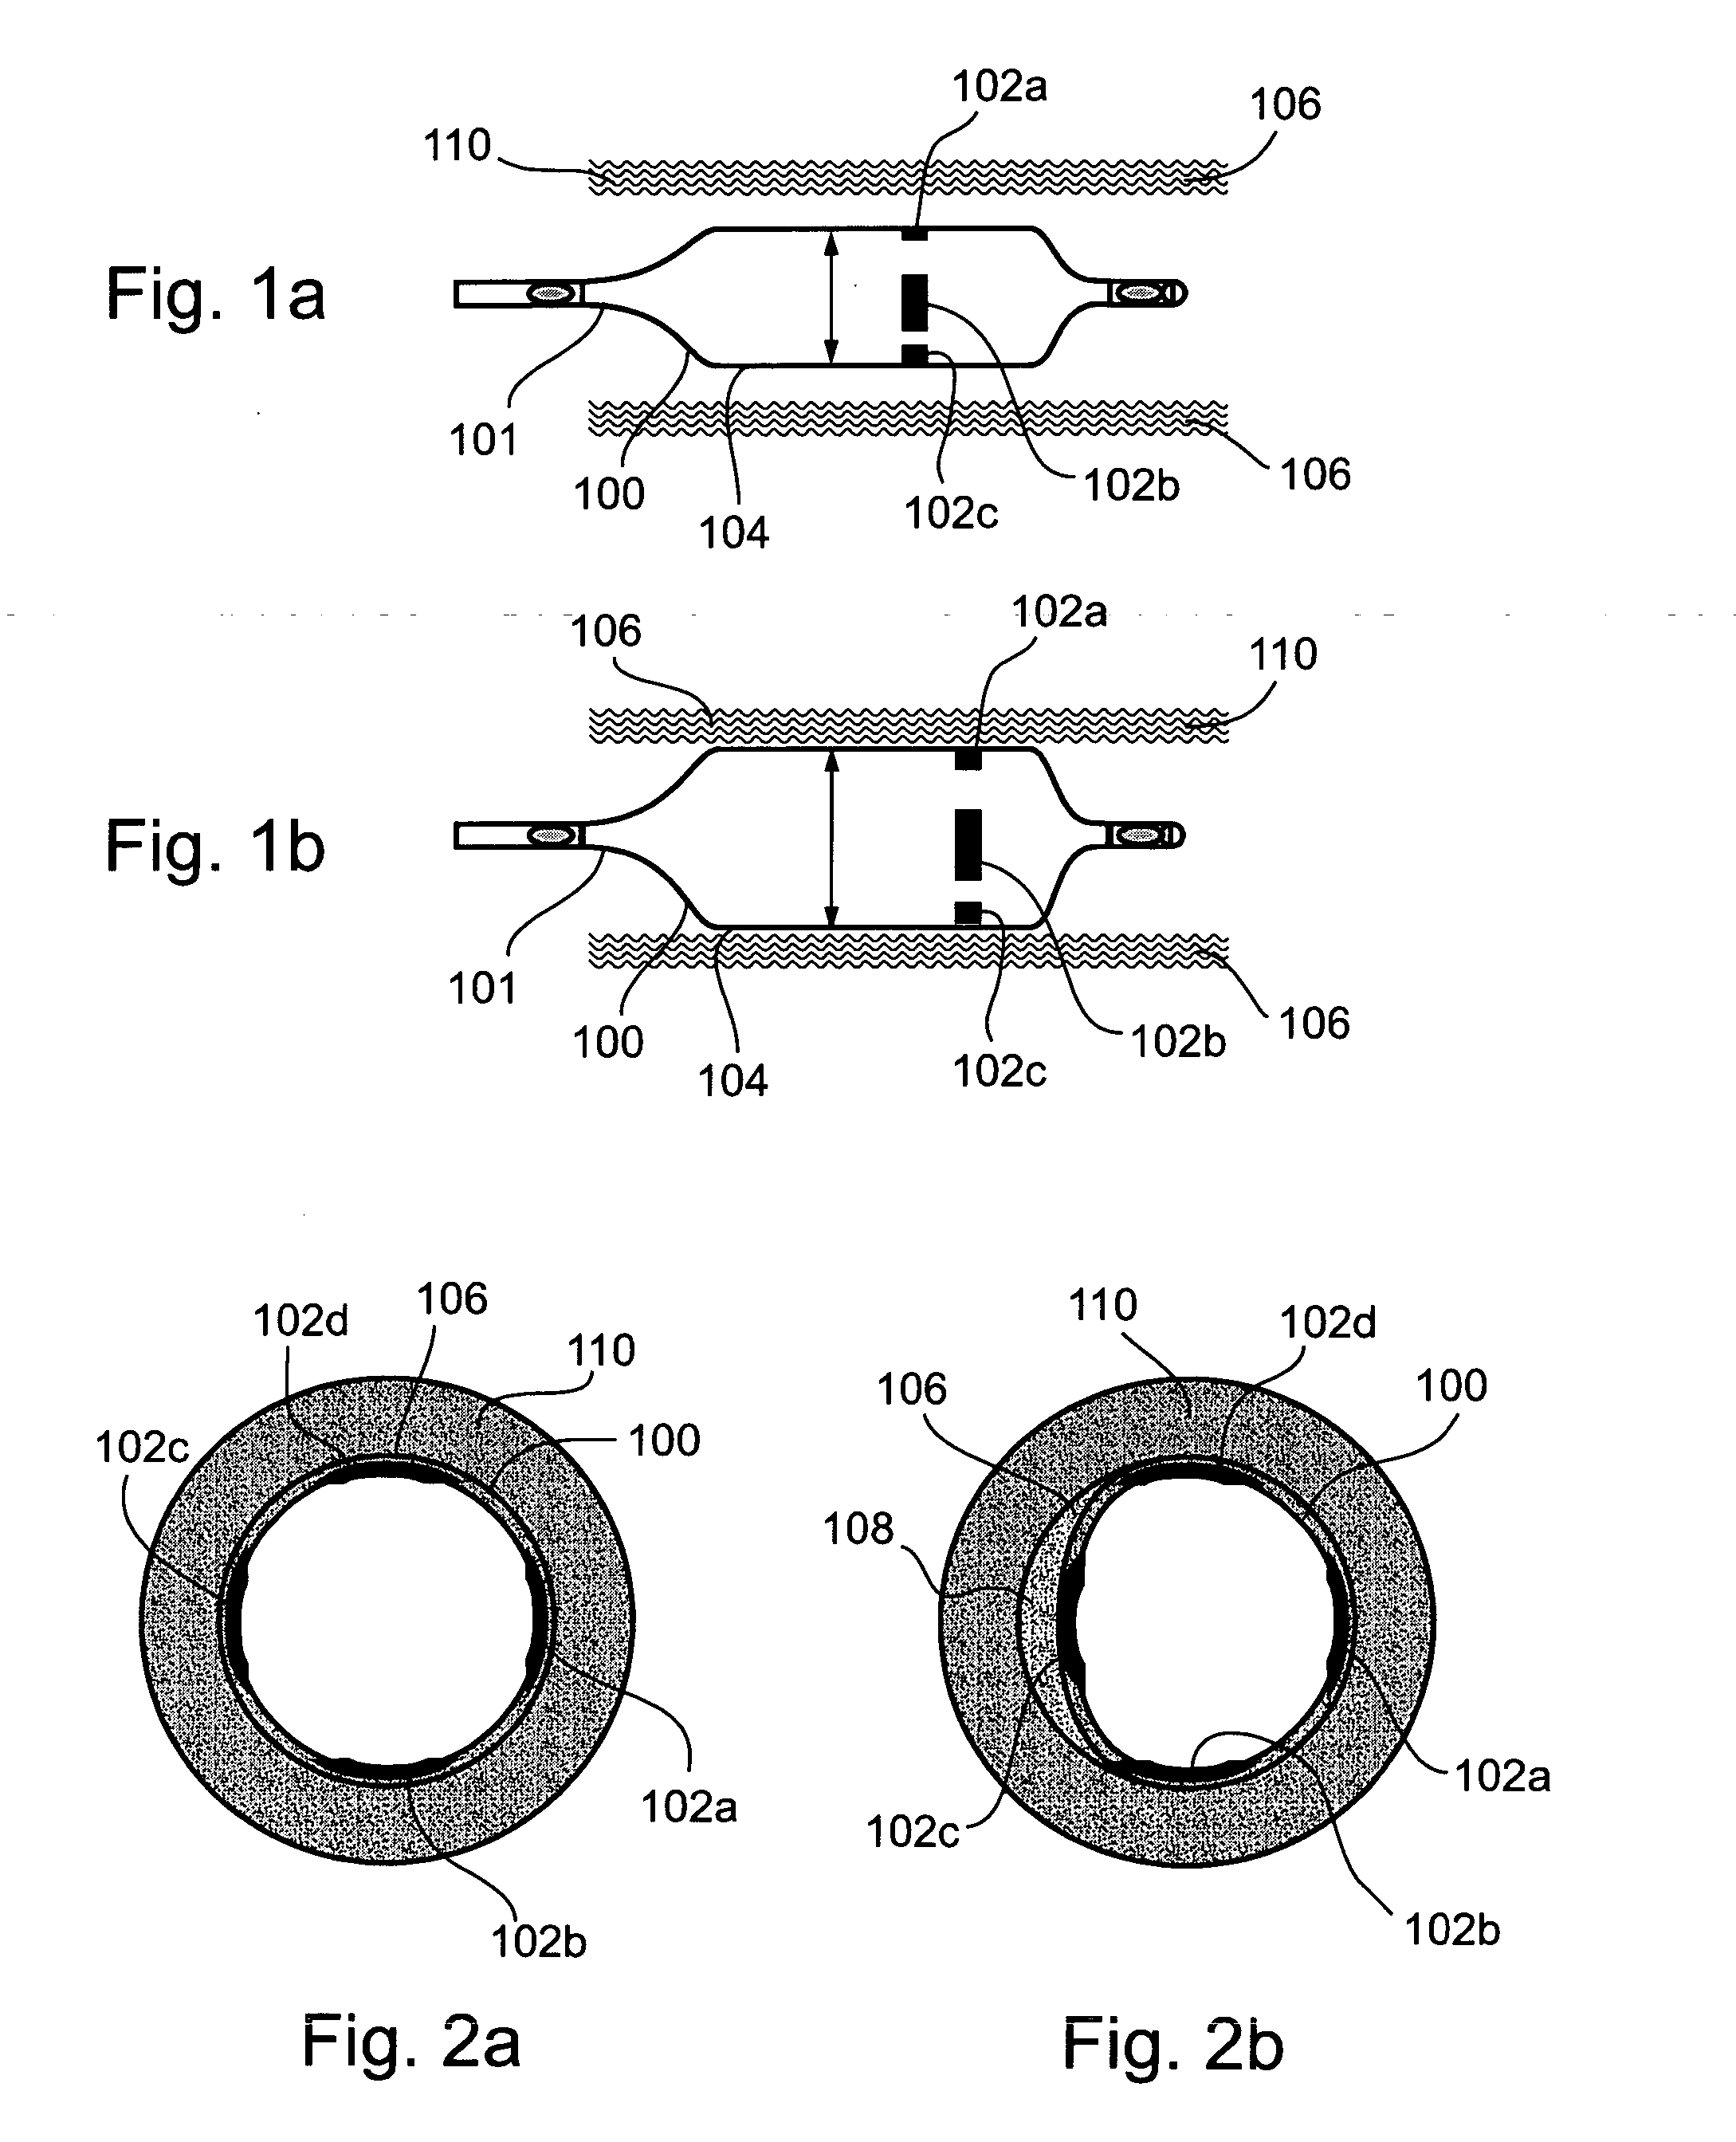 Device, system, and Method for detecting and localizing obstruction within a blood vessel